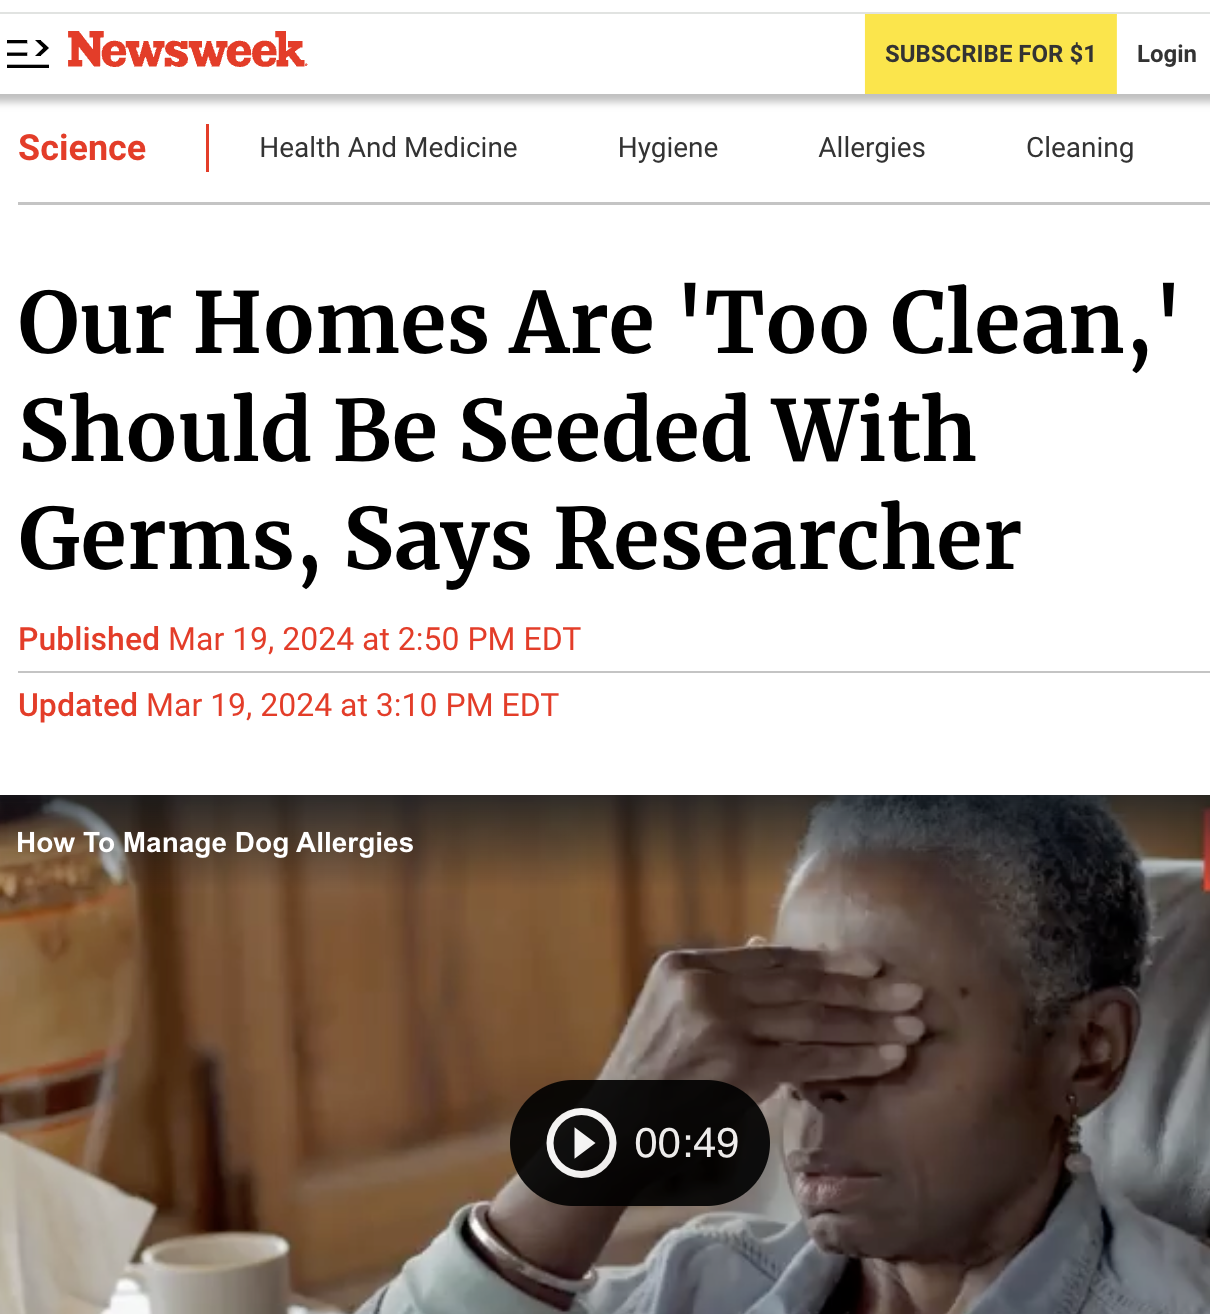 photo caption - > Newsweek Subscribe For $1 Login Science Health And Medicine Hygiene Allergies Cleaning Our Homes Are 'Too Clean,' Should Be Seeded With Germs, Says Researcher Published at Edt Updated at Edt How To Manage Dog Allergies